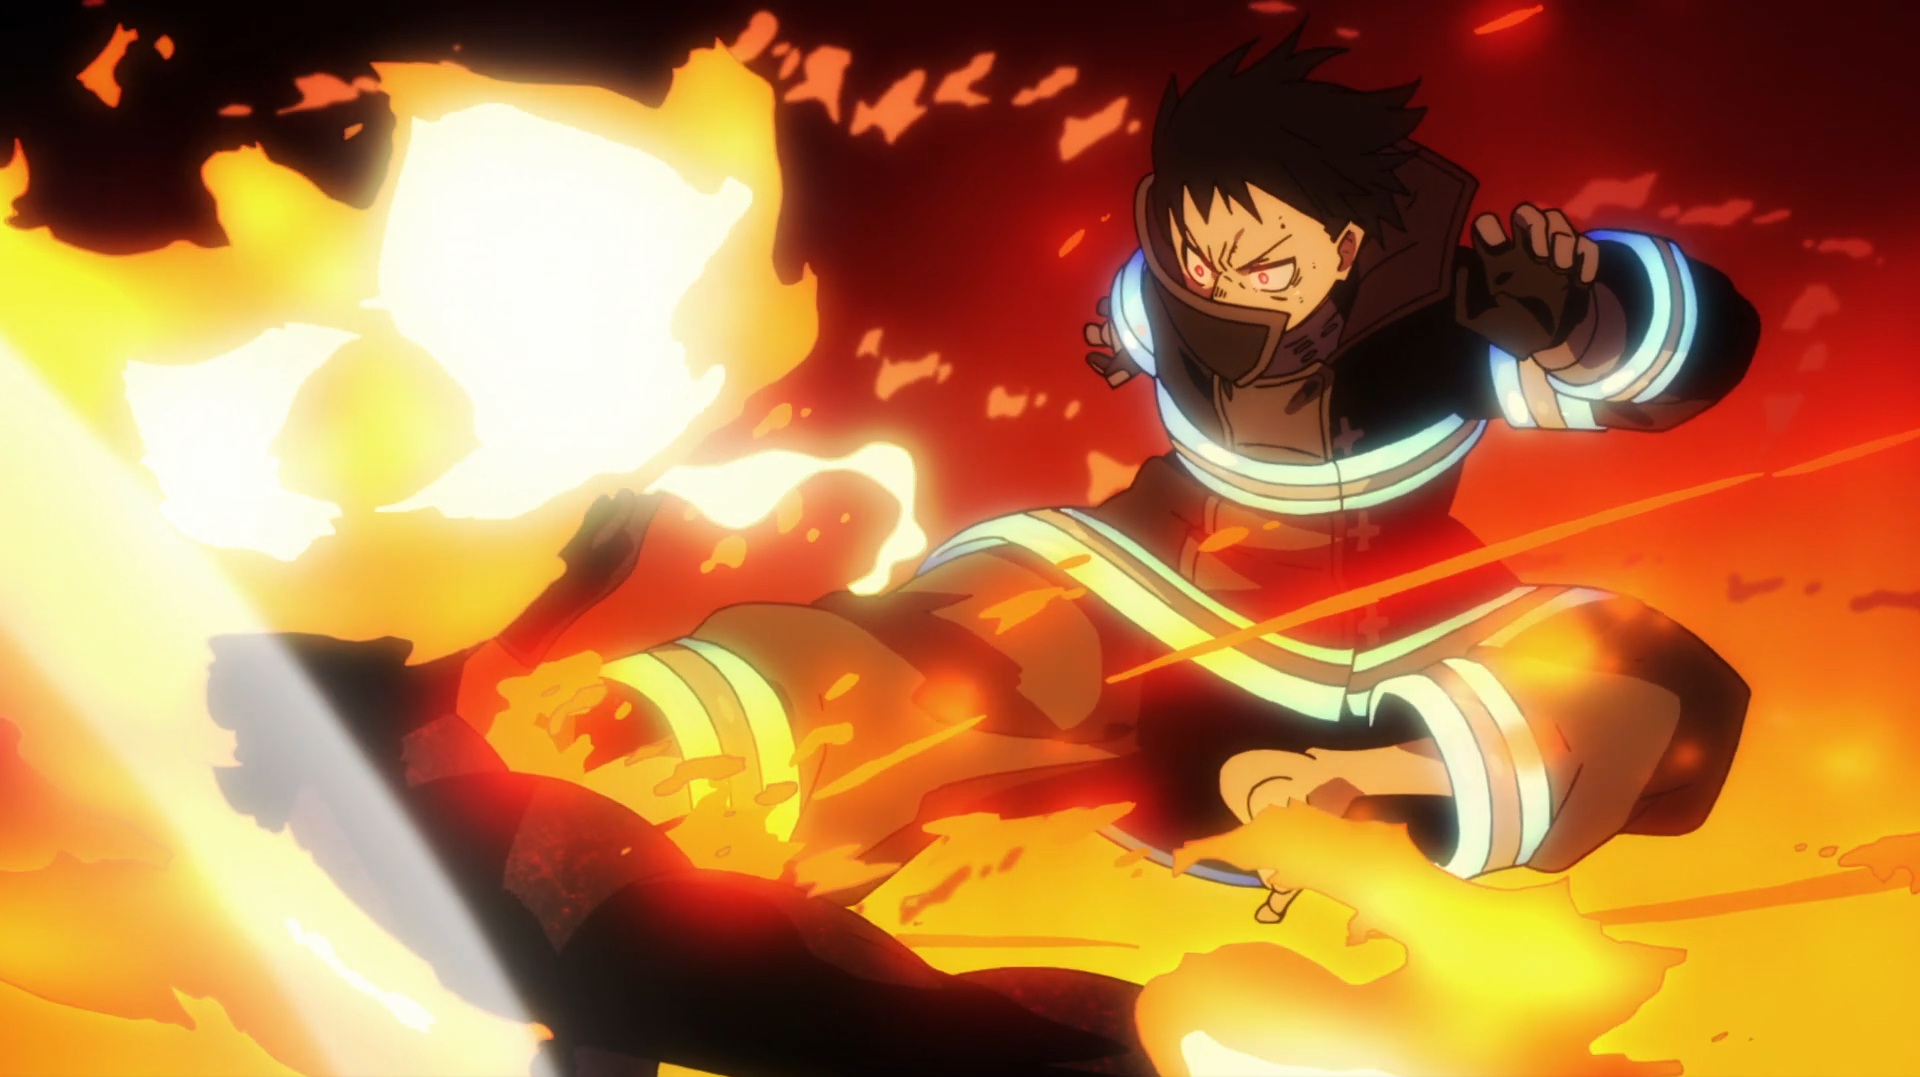 Fire Force, Antagonist that still have a chance to change